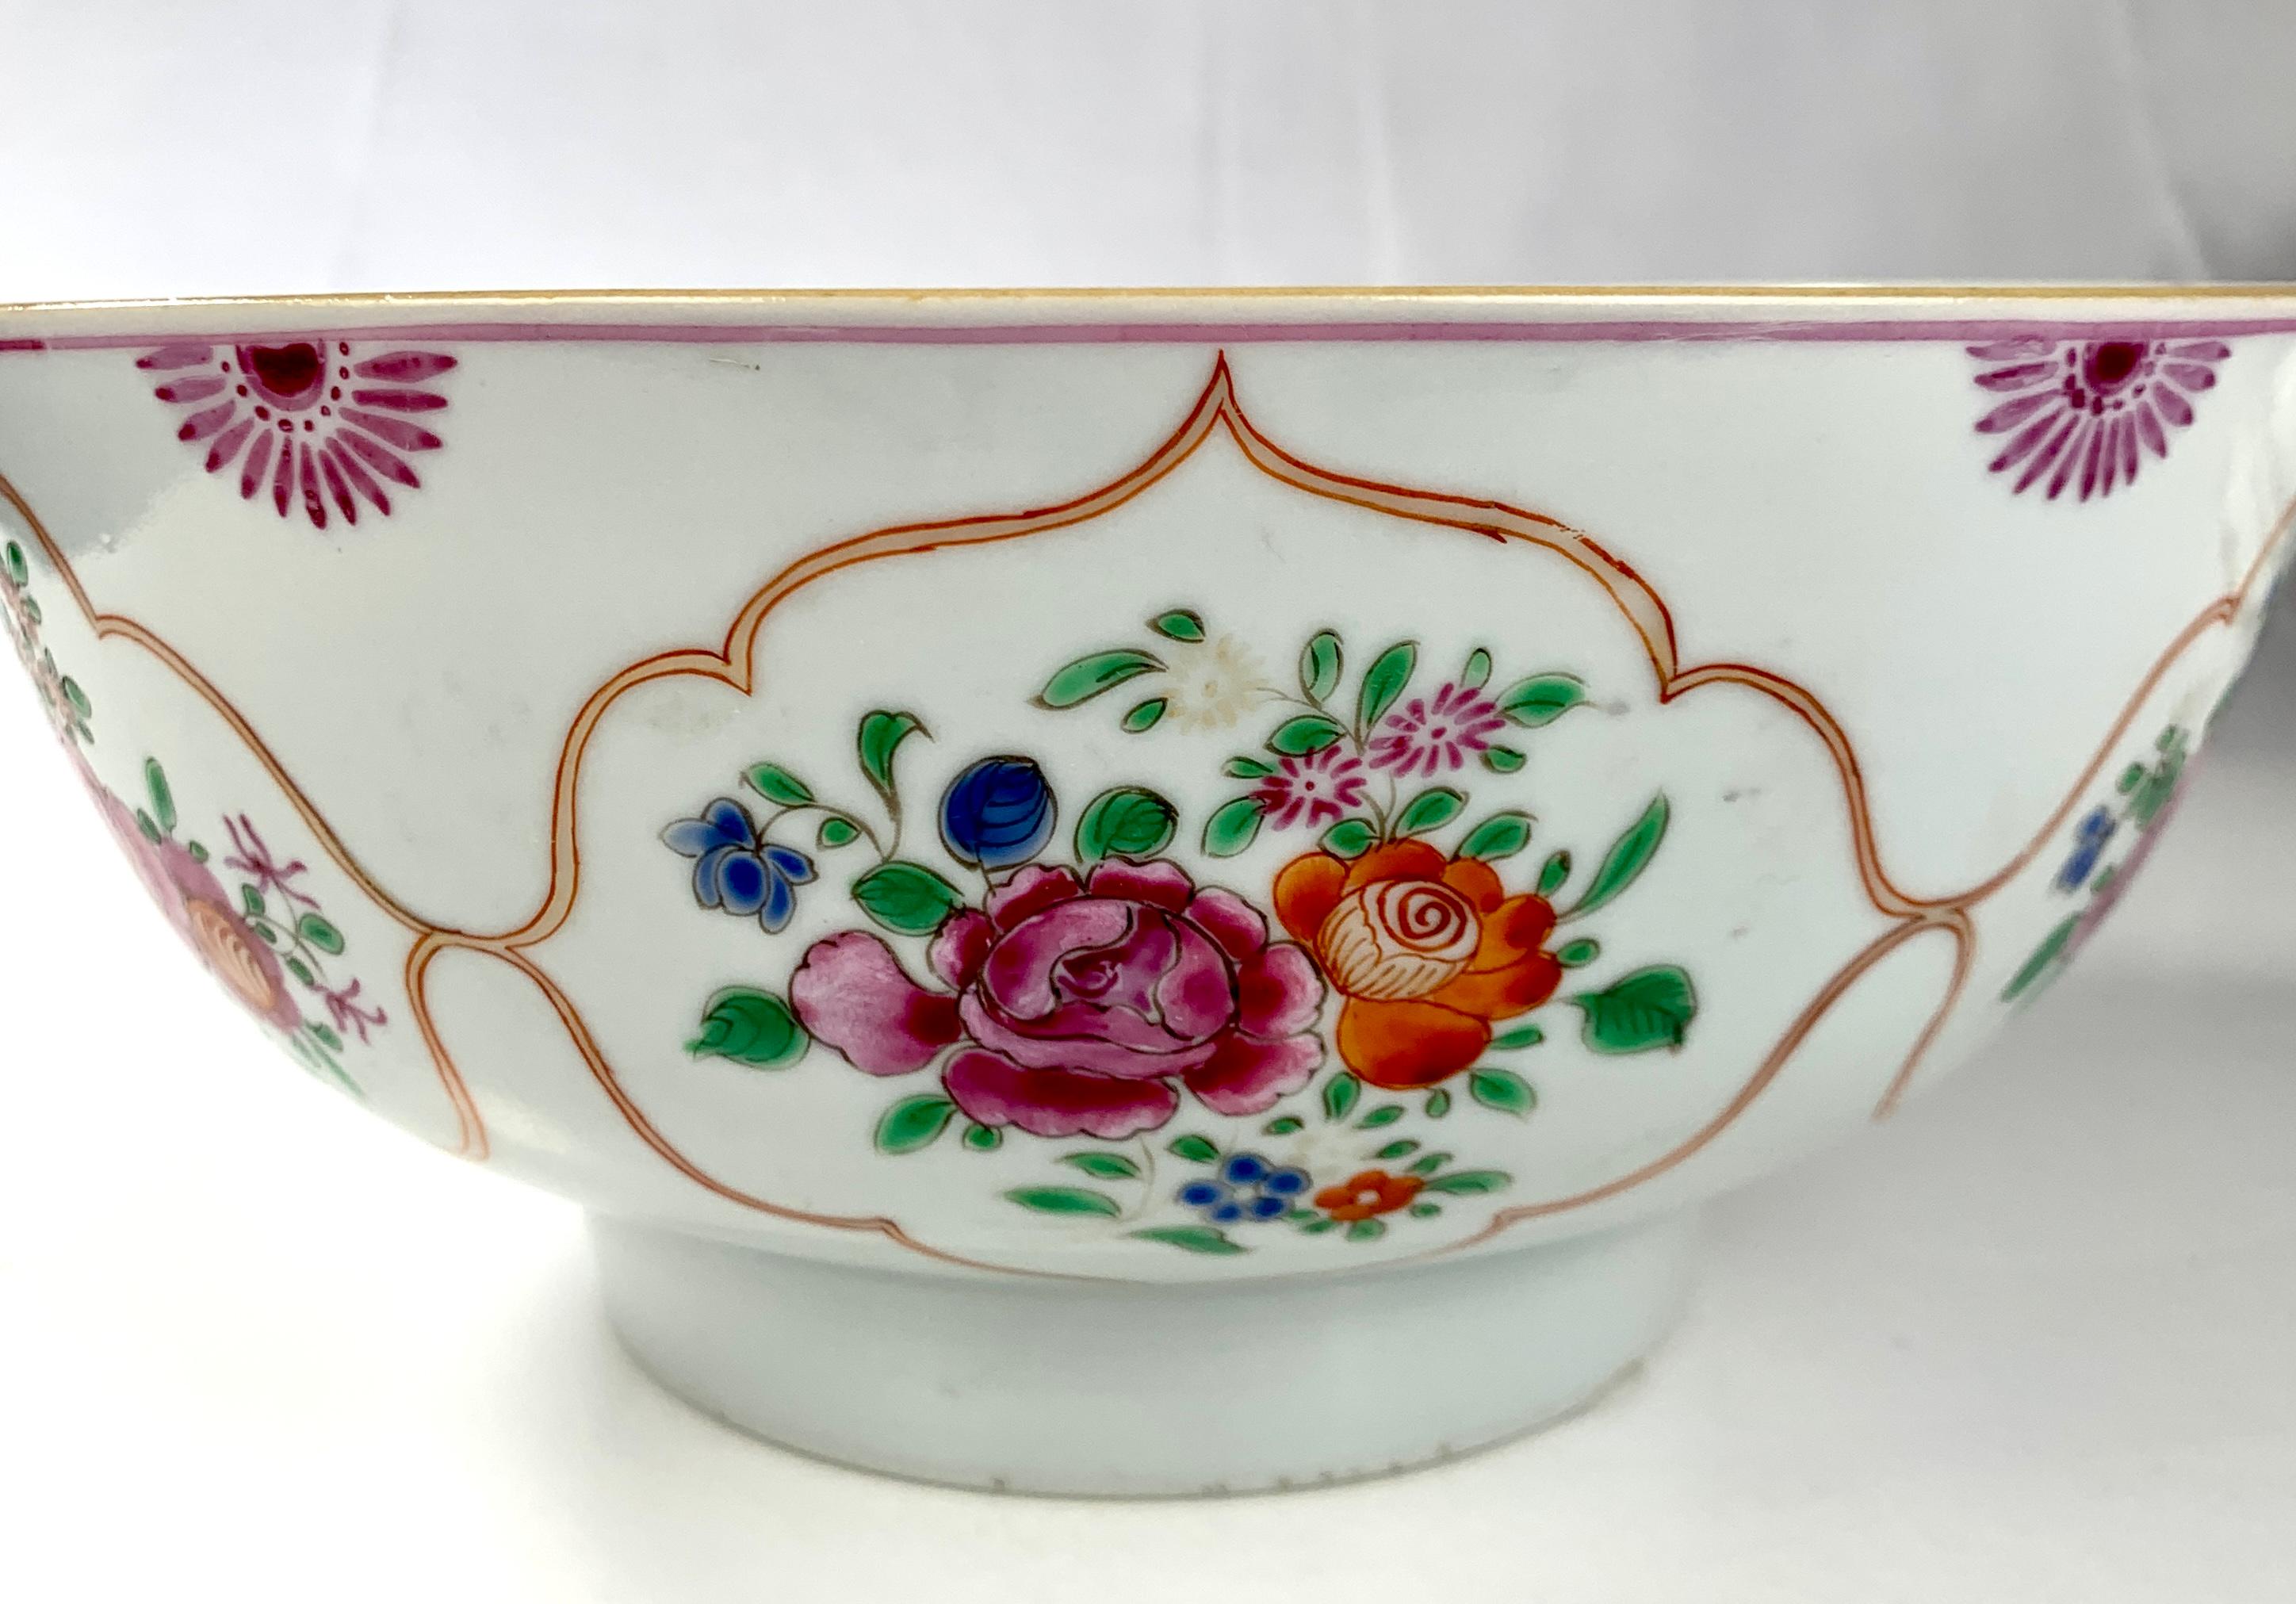 This lovely Chinese Famille Rose porcelain bowl is decorated to the outside with pink and orange peonies surrounded by small green and blue leaves.
The beautiful decoration is set inside six cloud collars that encircle the bowl.
In Chinese